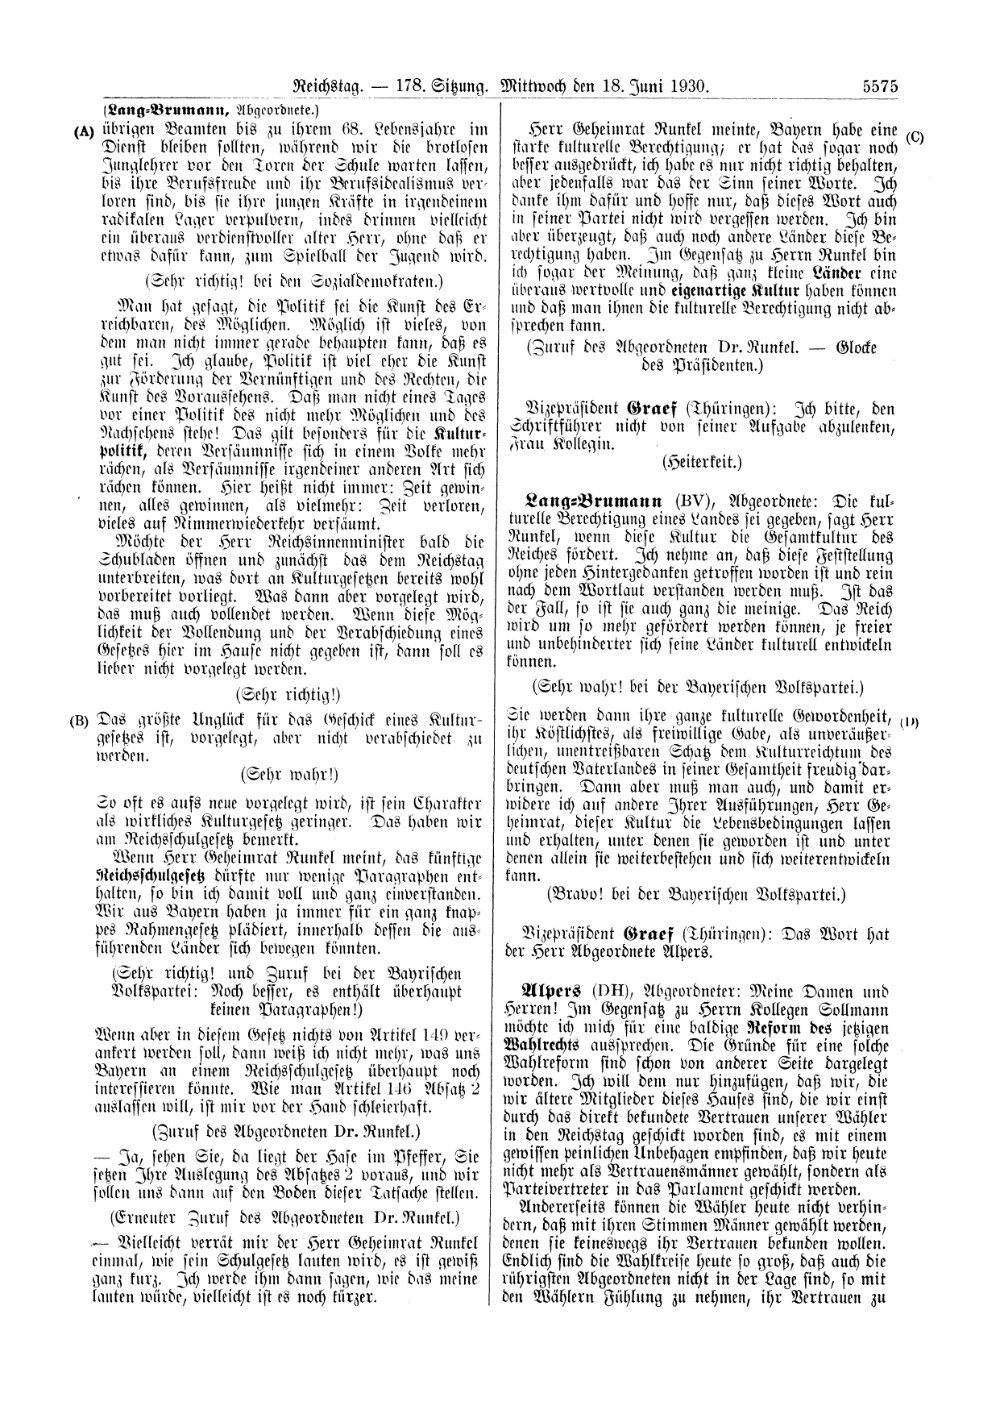 Scan of page 5575